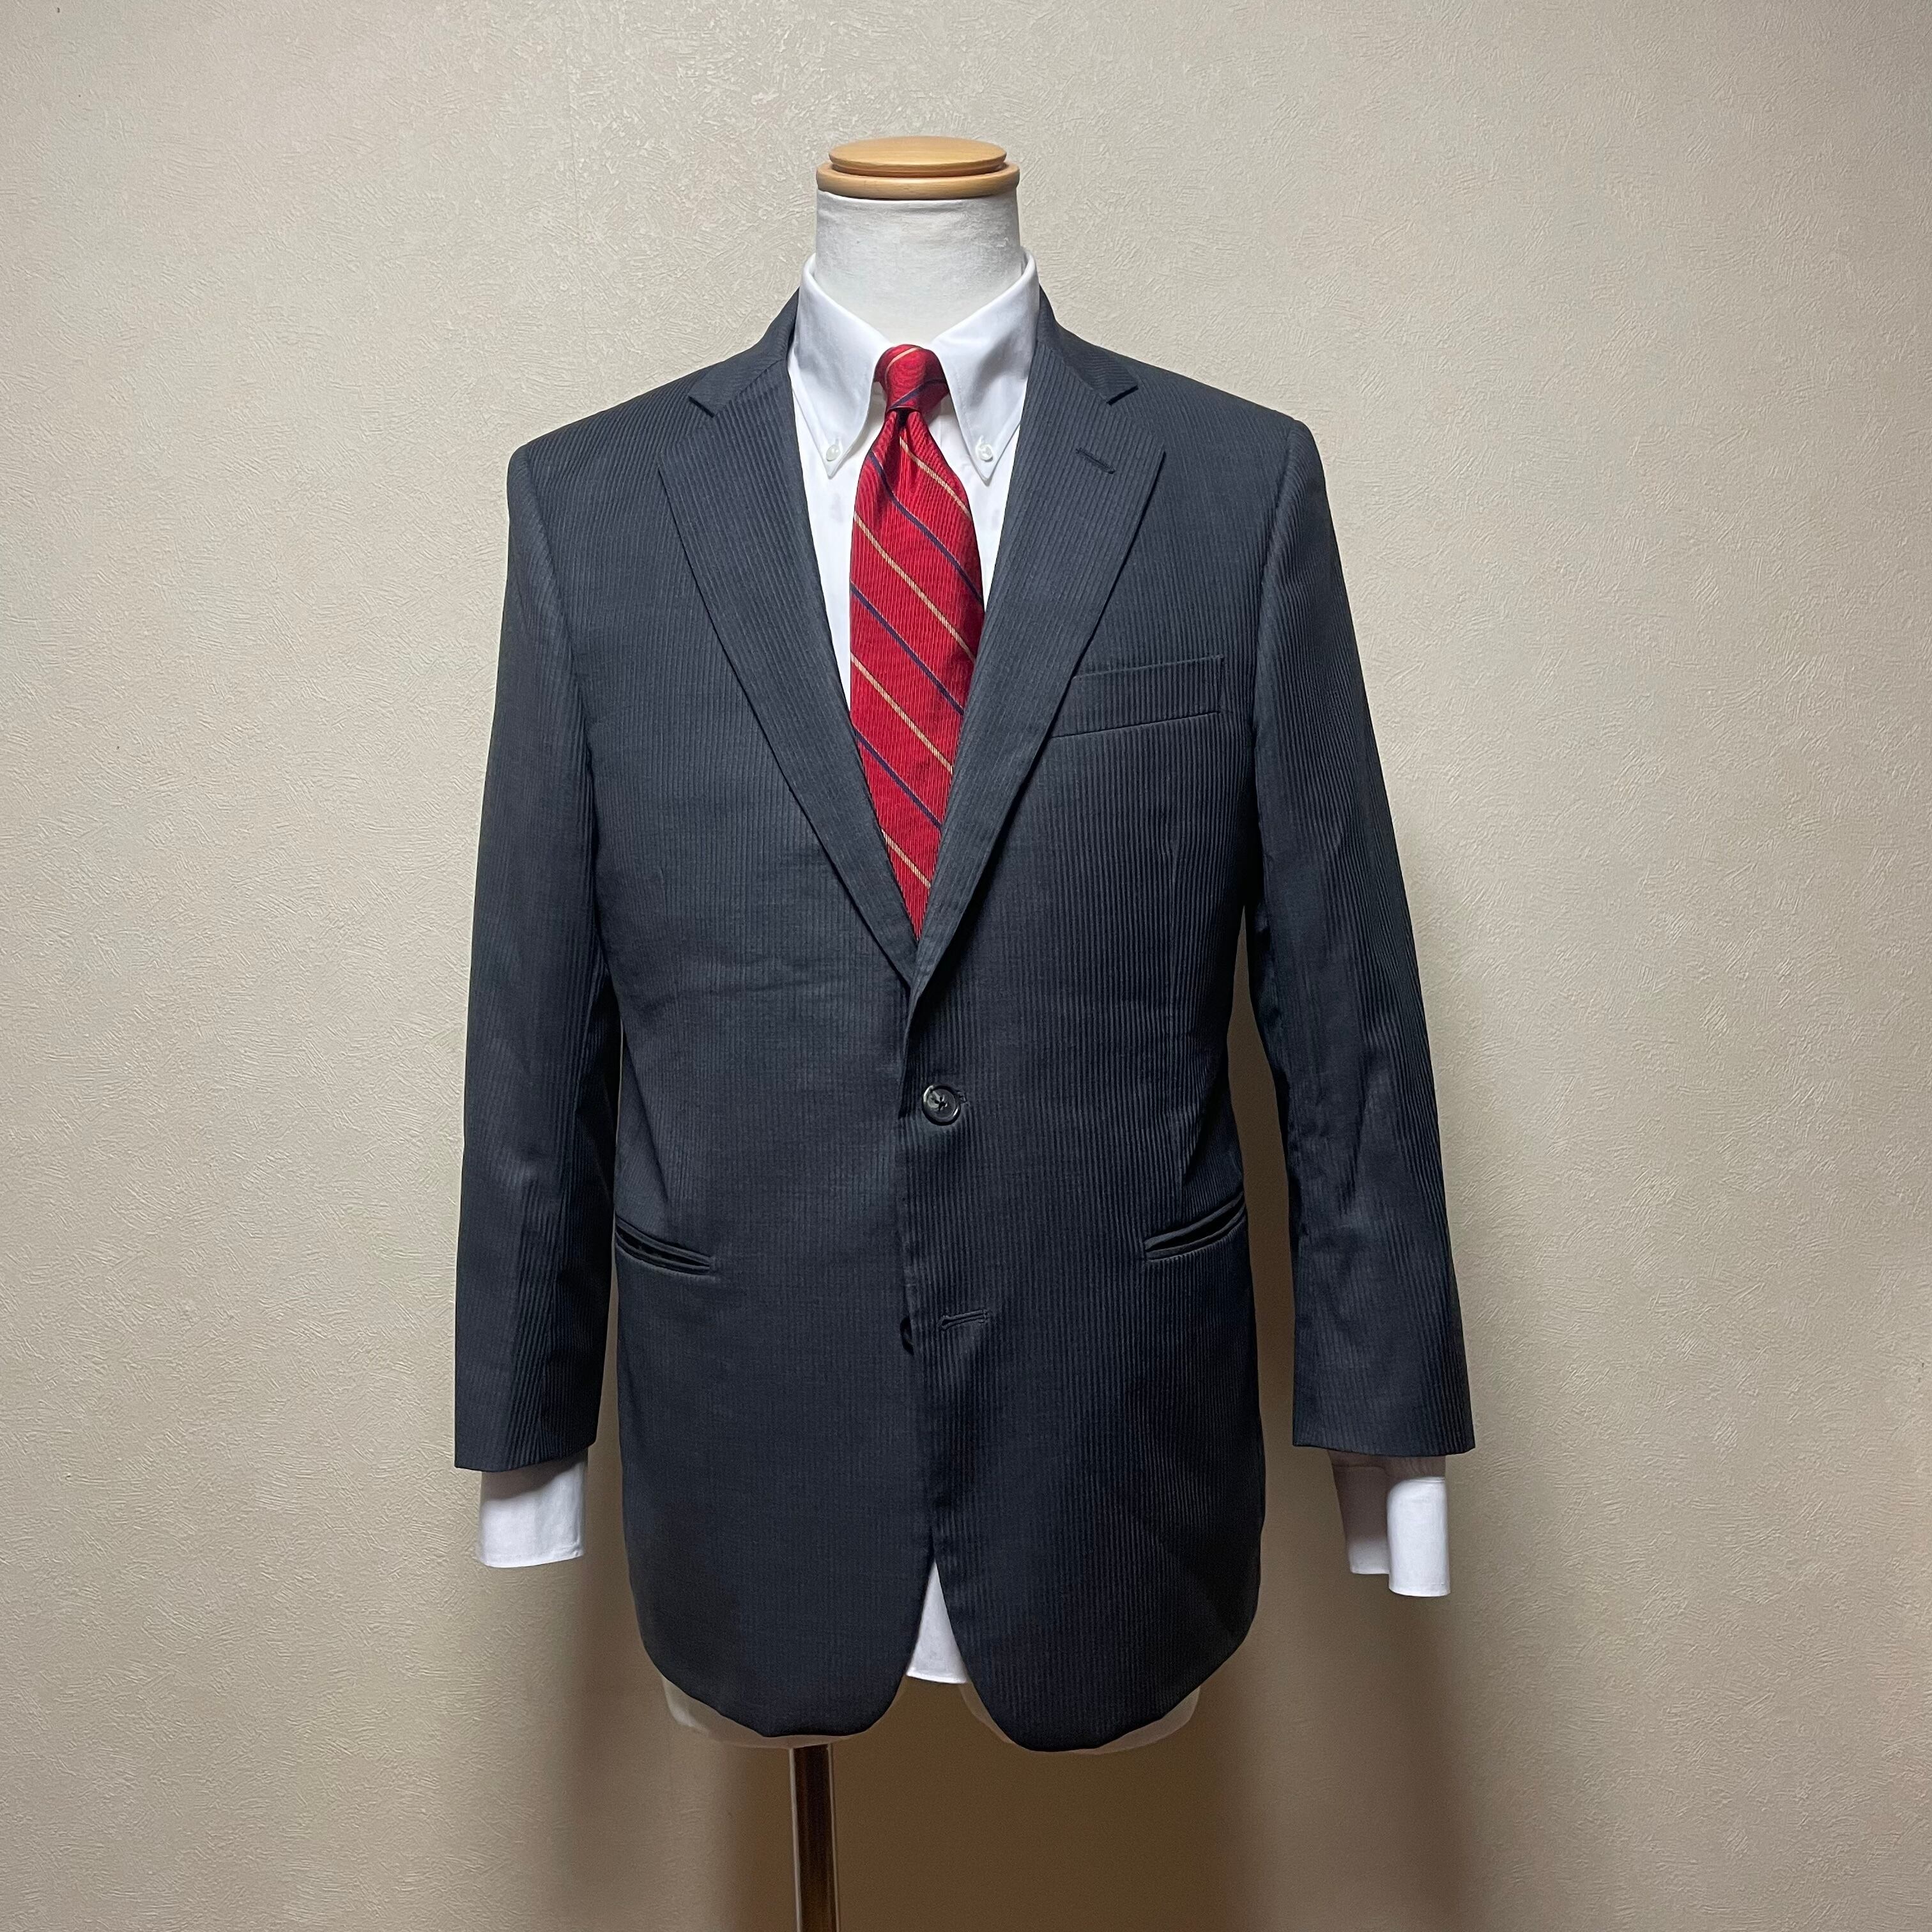 Used Brooks Brothers 1818 Saxxon wool 2B stripe suit | L.E powered by BASE